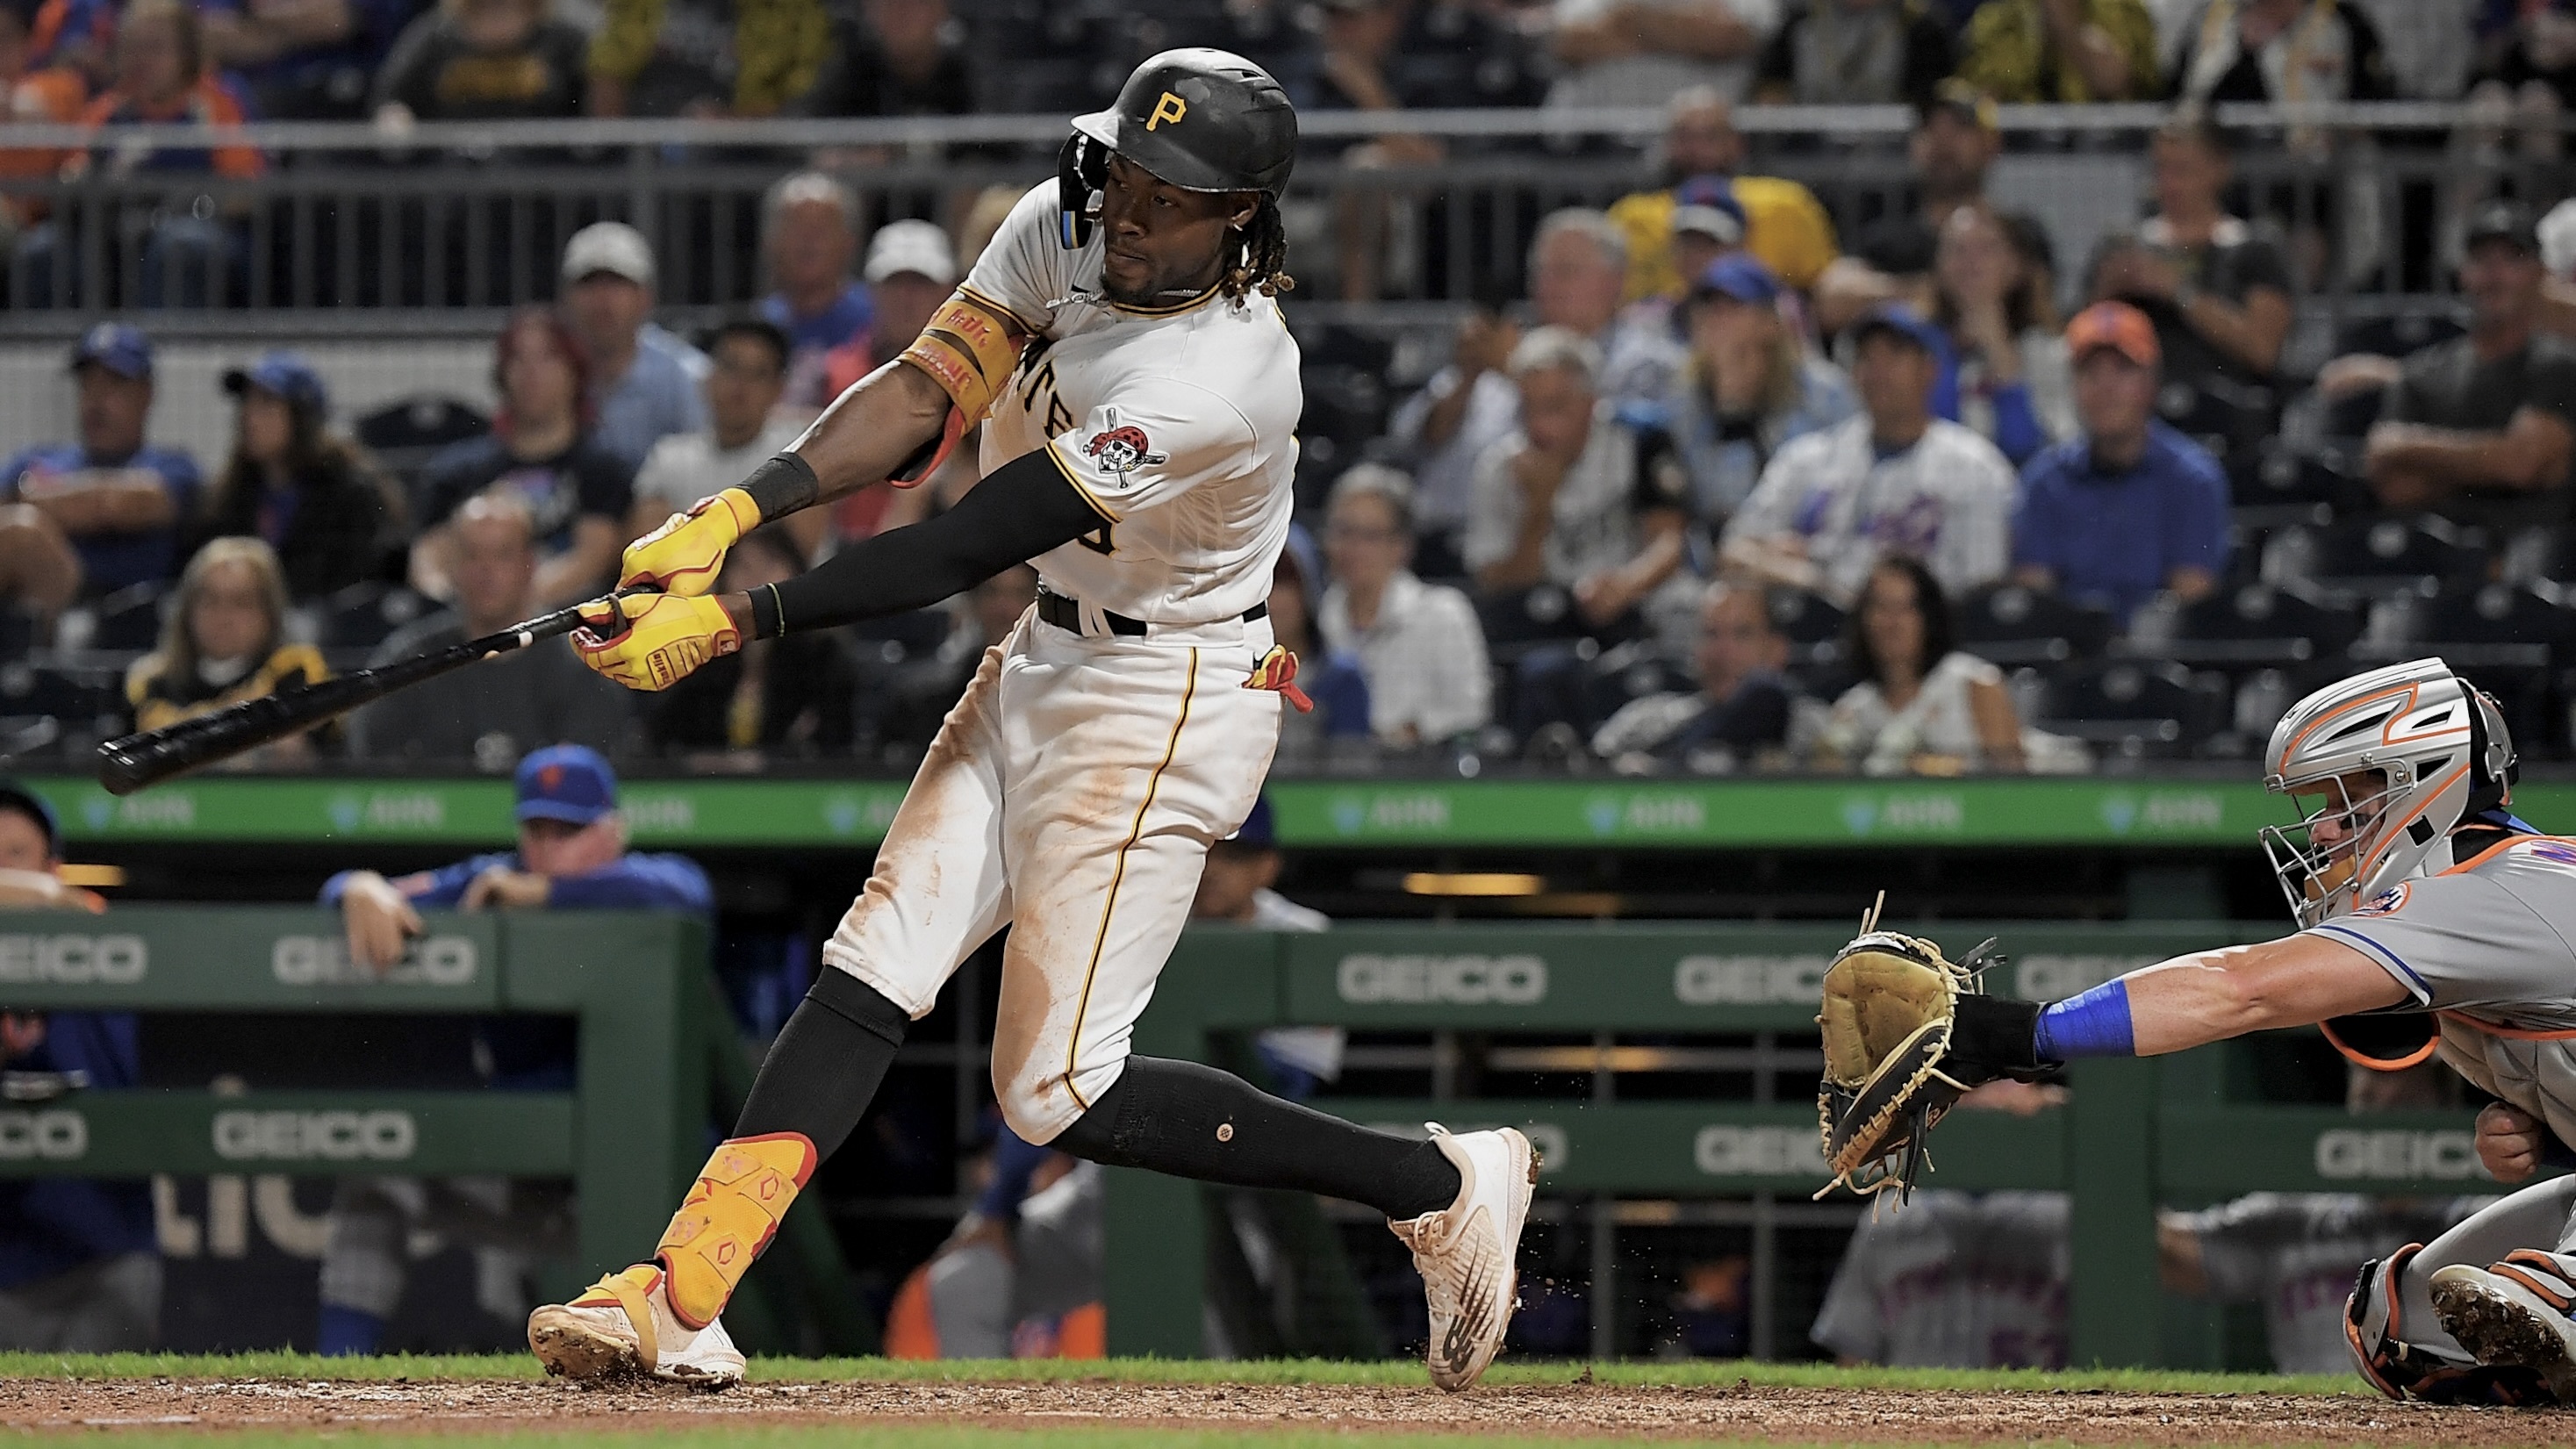 Oneil Cruz's homer into the Allegheny serves as a reminder of his